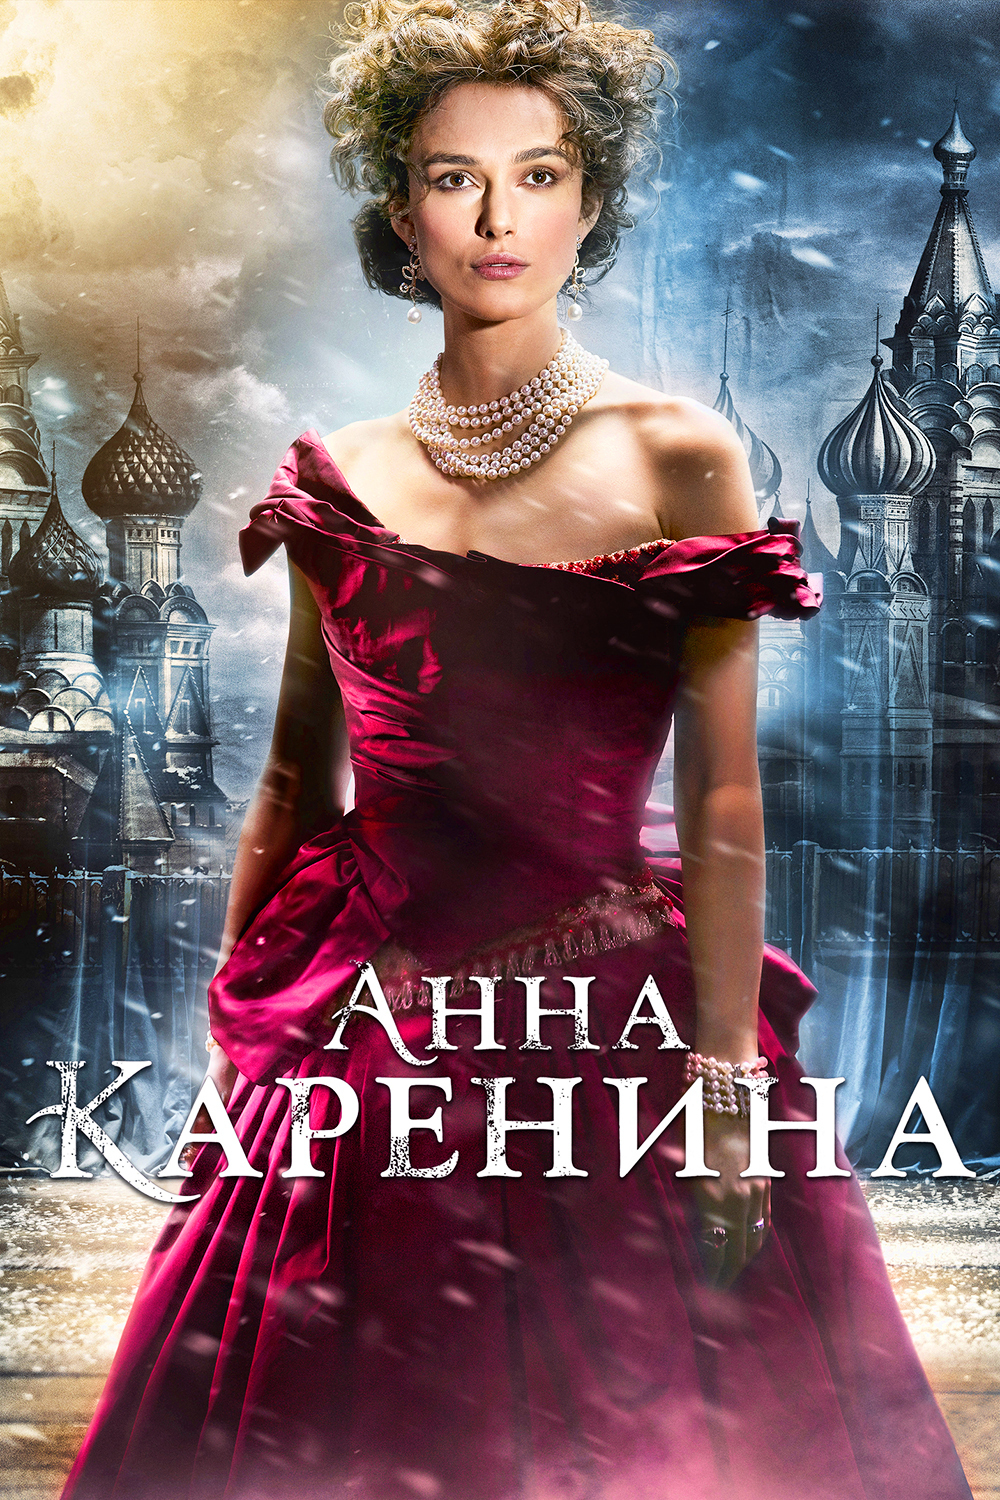 Anna Karenina instal the last version for android